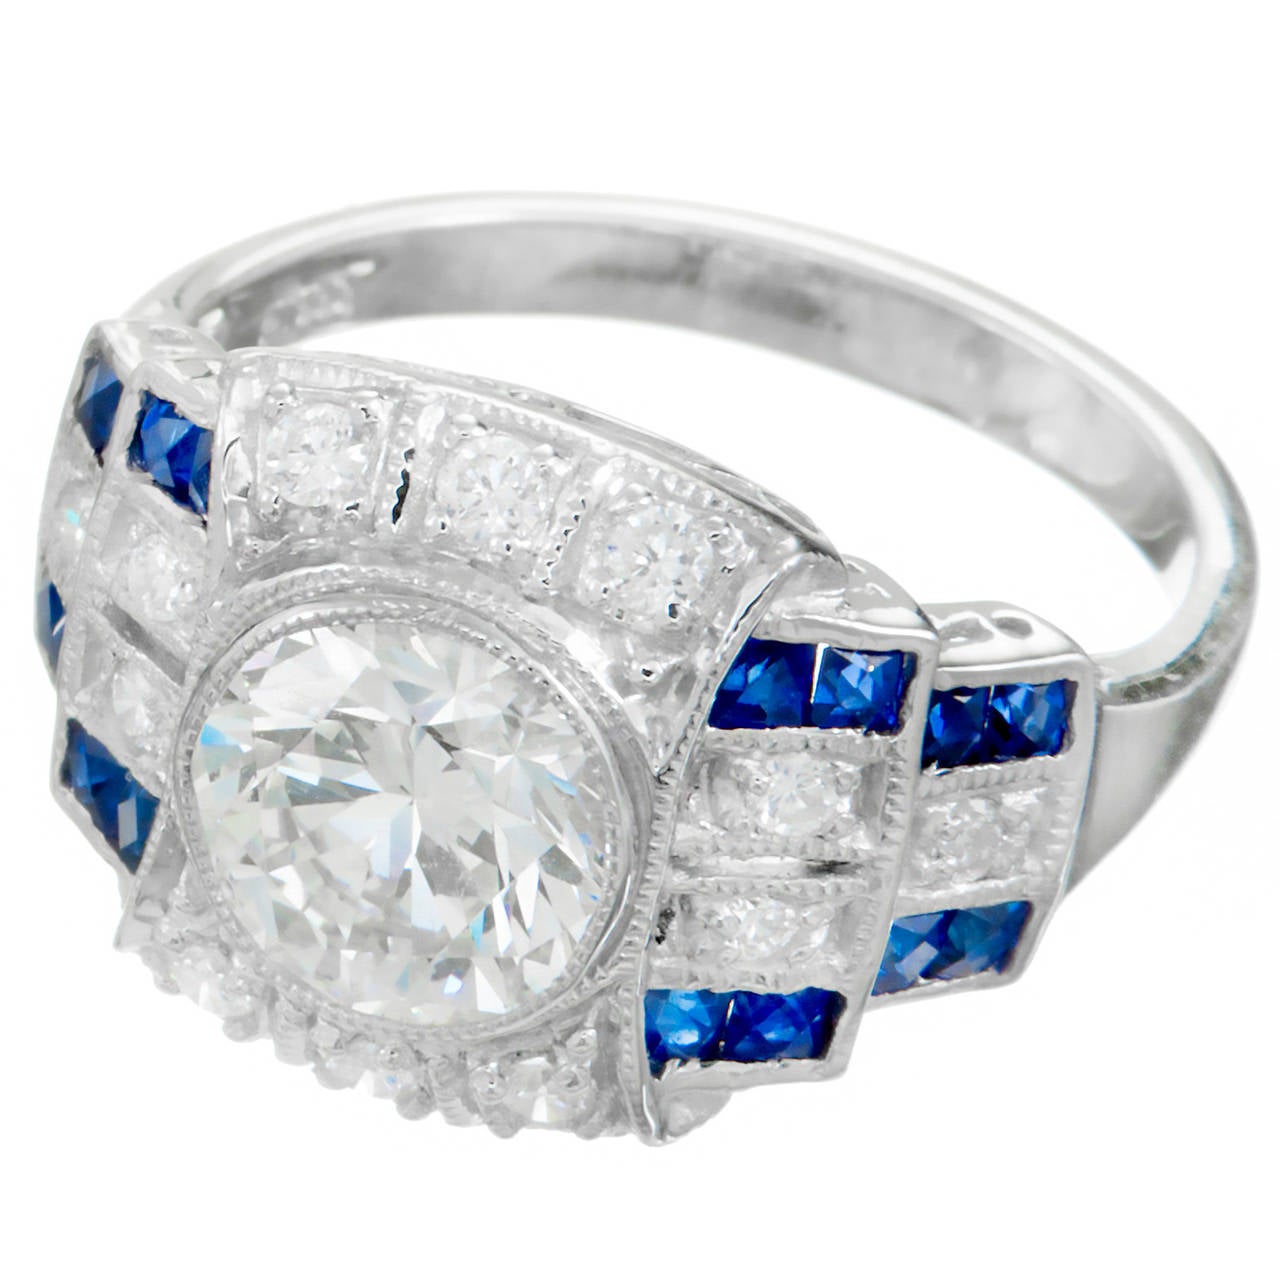 1940's Art Deco, diamond and sapphire engagement ring. Platinum setting with round center diamond and calibre cut Sapphires, accented by ideal cut round diamonds. Face up color I plus. Shows just a hint of warm color and lots of sparkle.

1 round